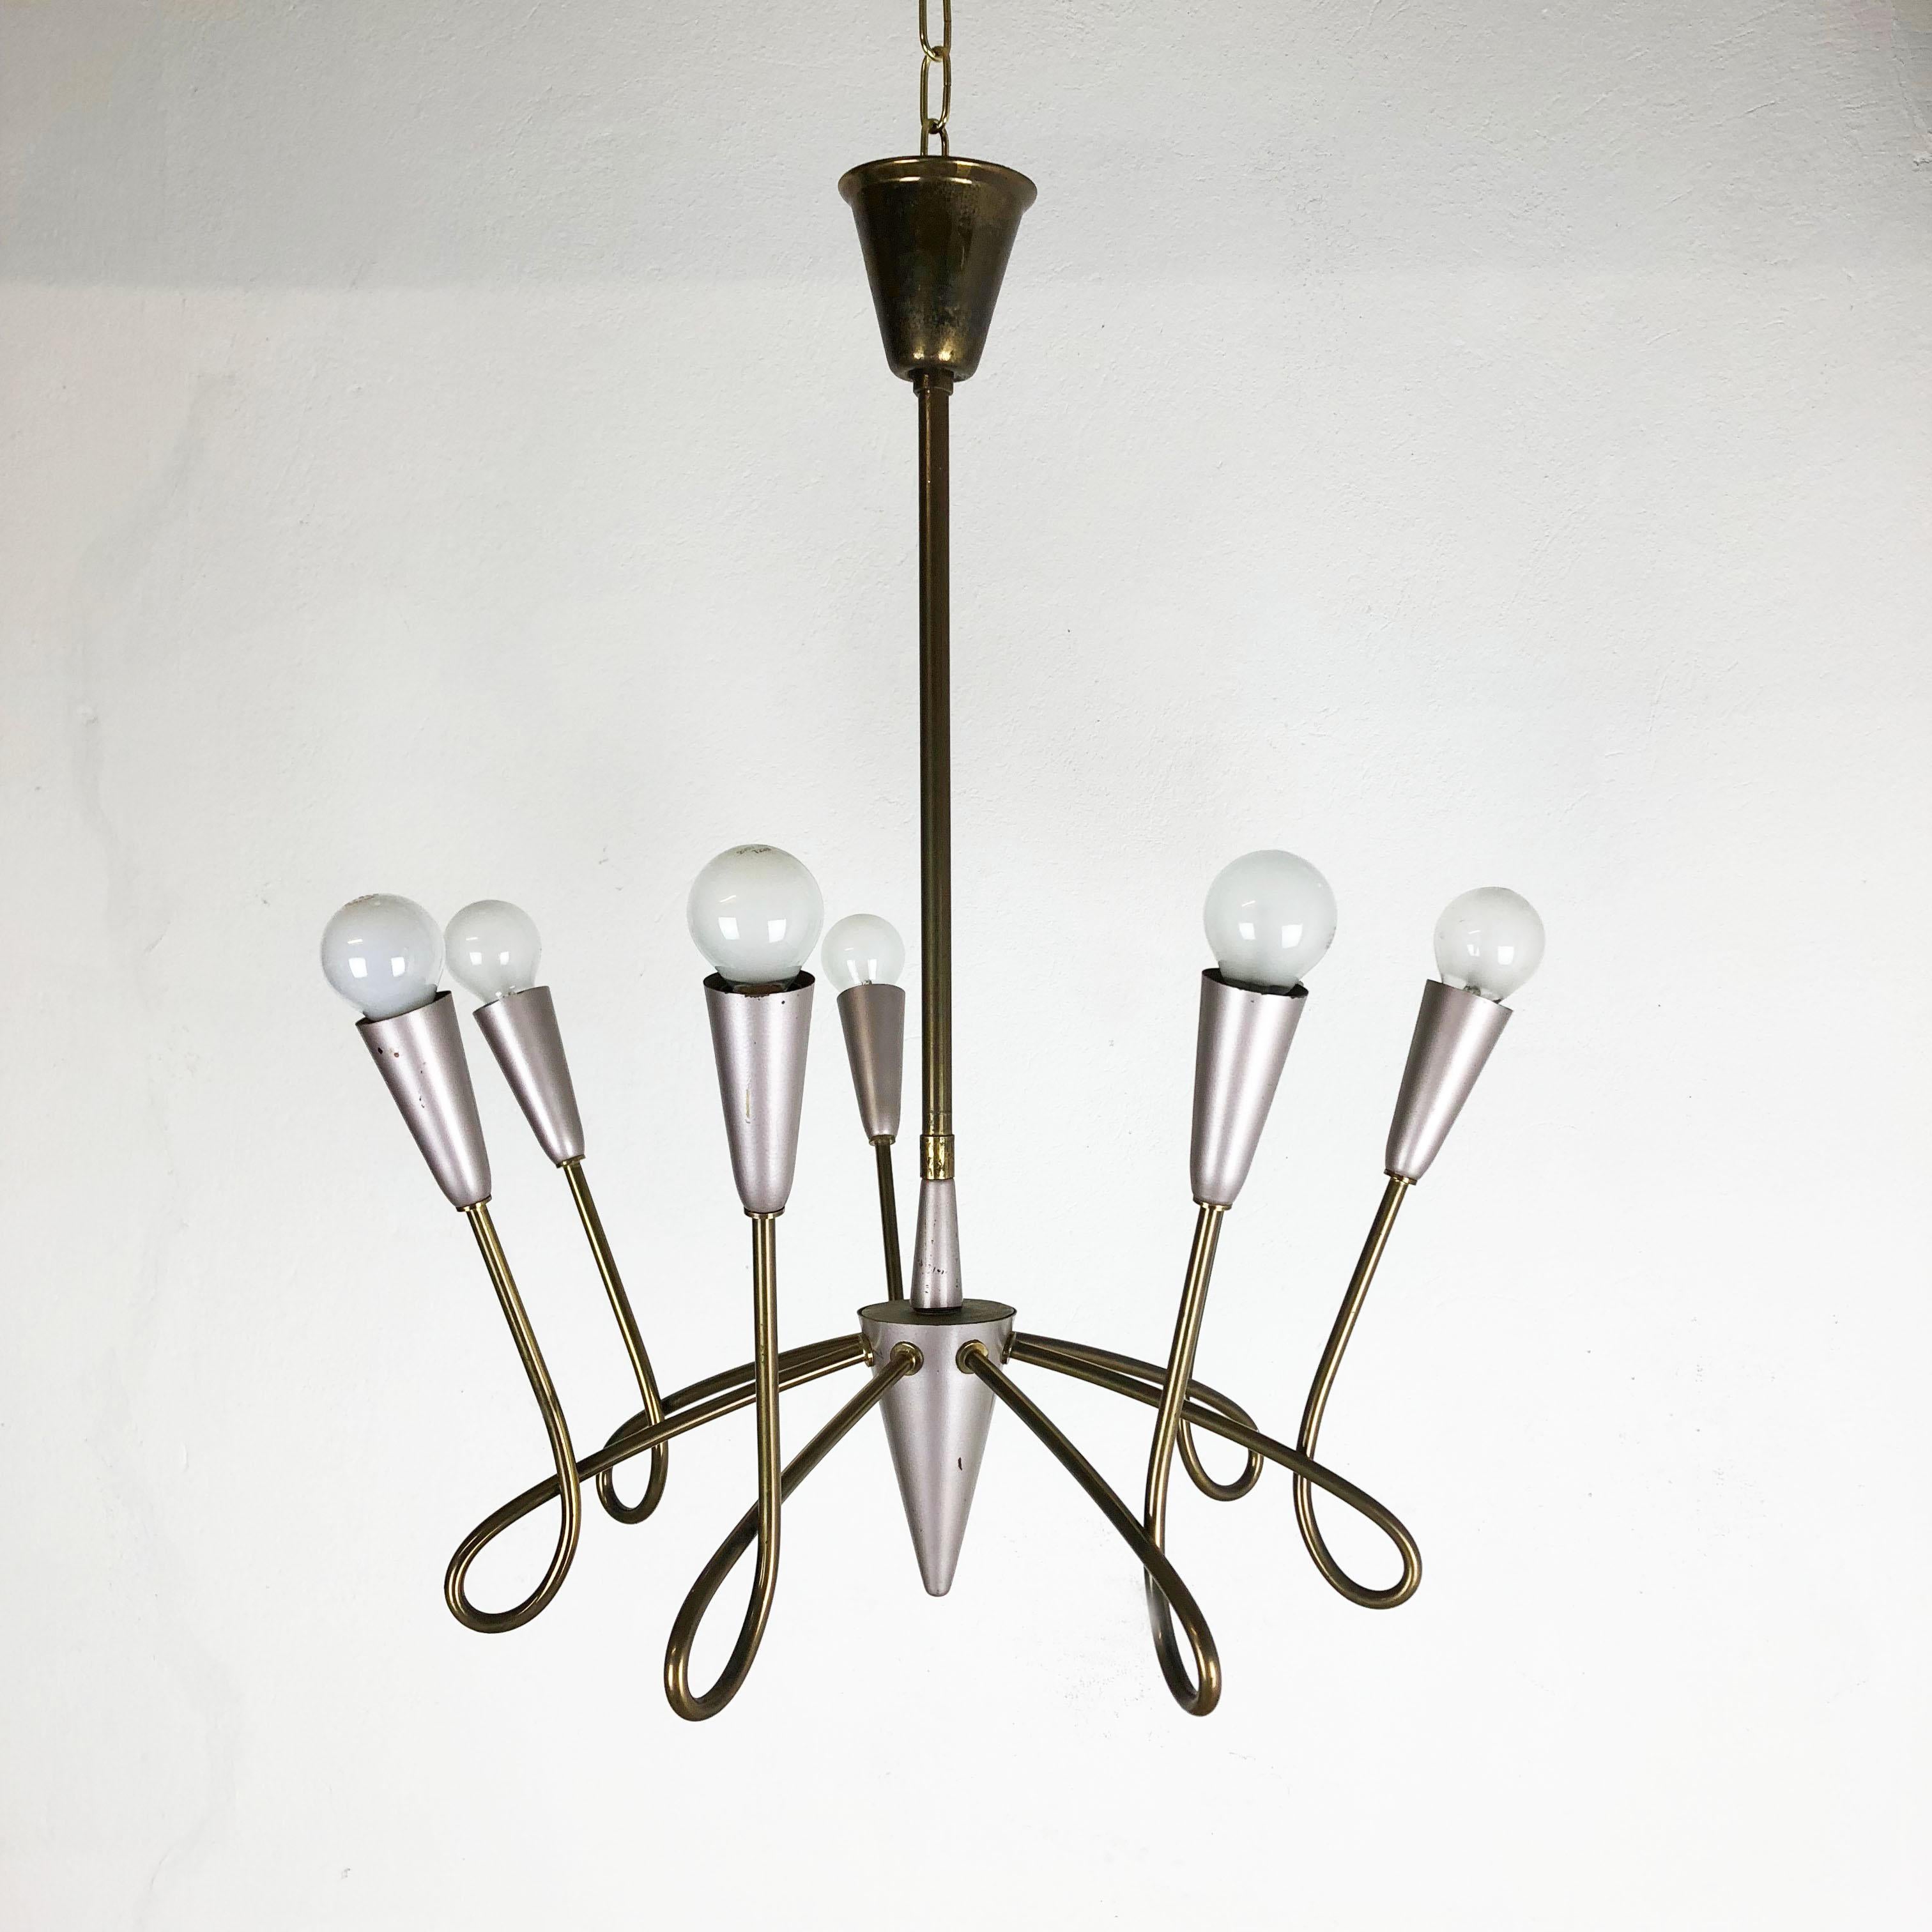 Article:

hanging light


Producer:

Origin Italy in the manner of STILNOVO



Age:

1950s



This modernist light was produced in Italy in the 1950s. It is made from solid brass with light arm socket elements in light silver tone.